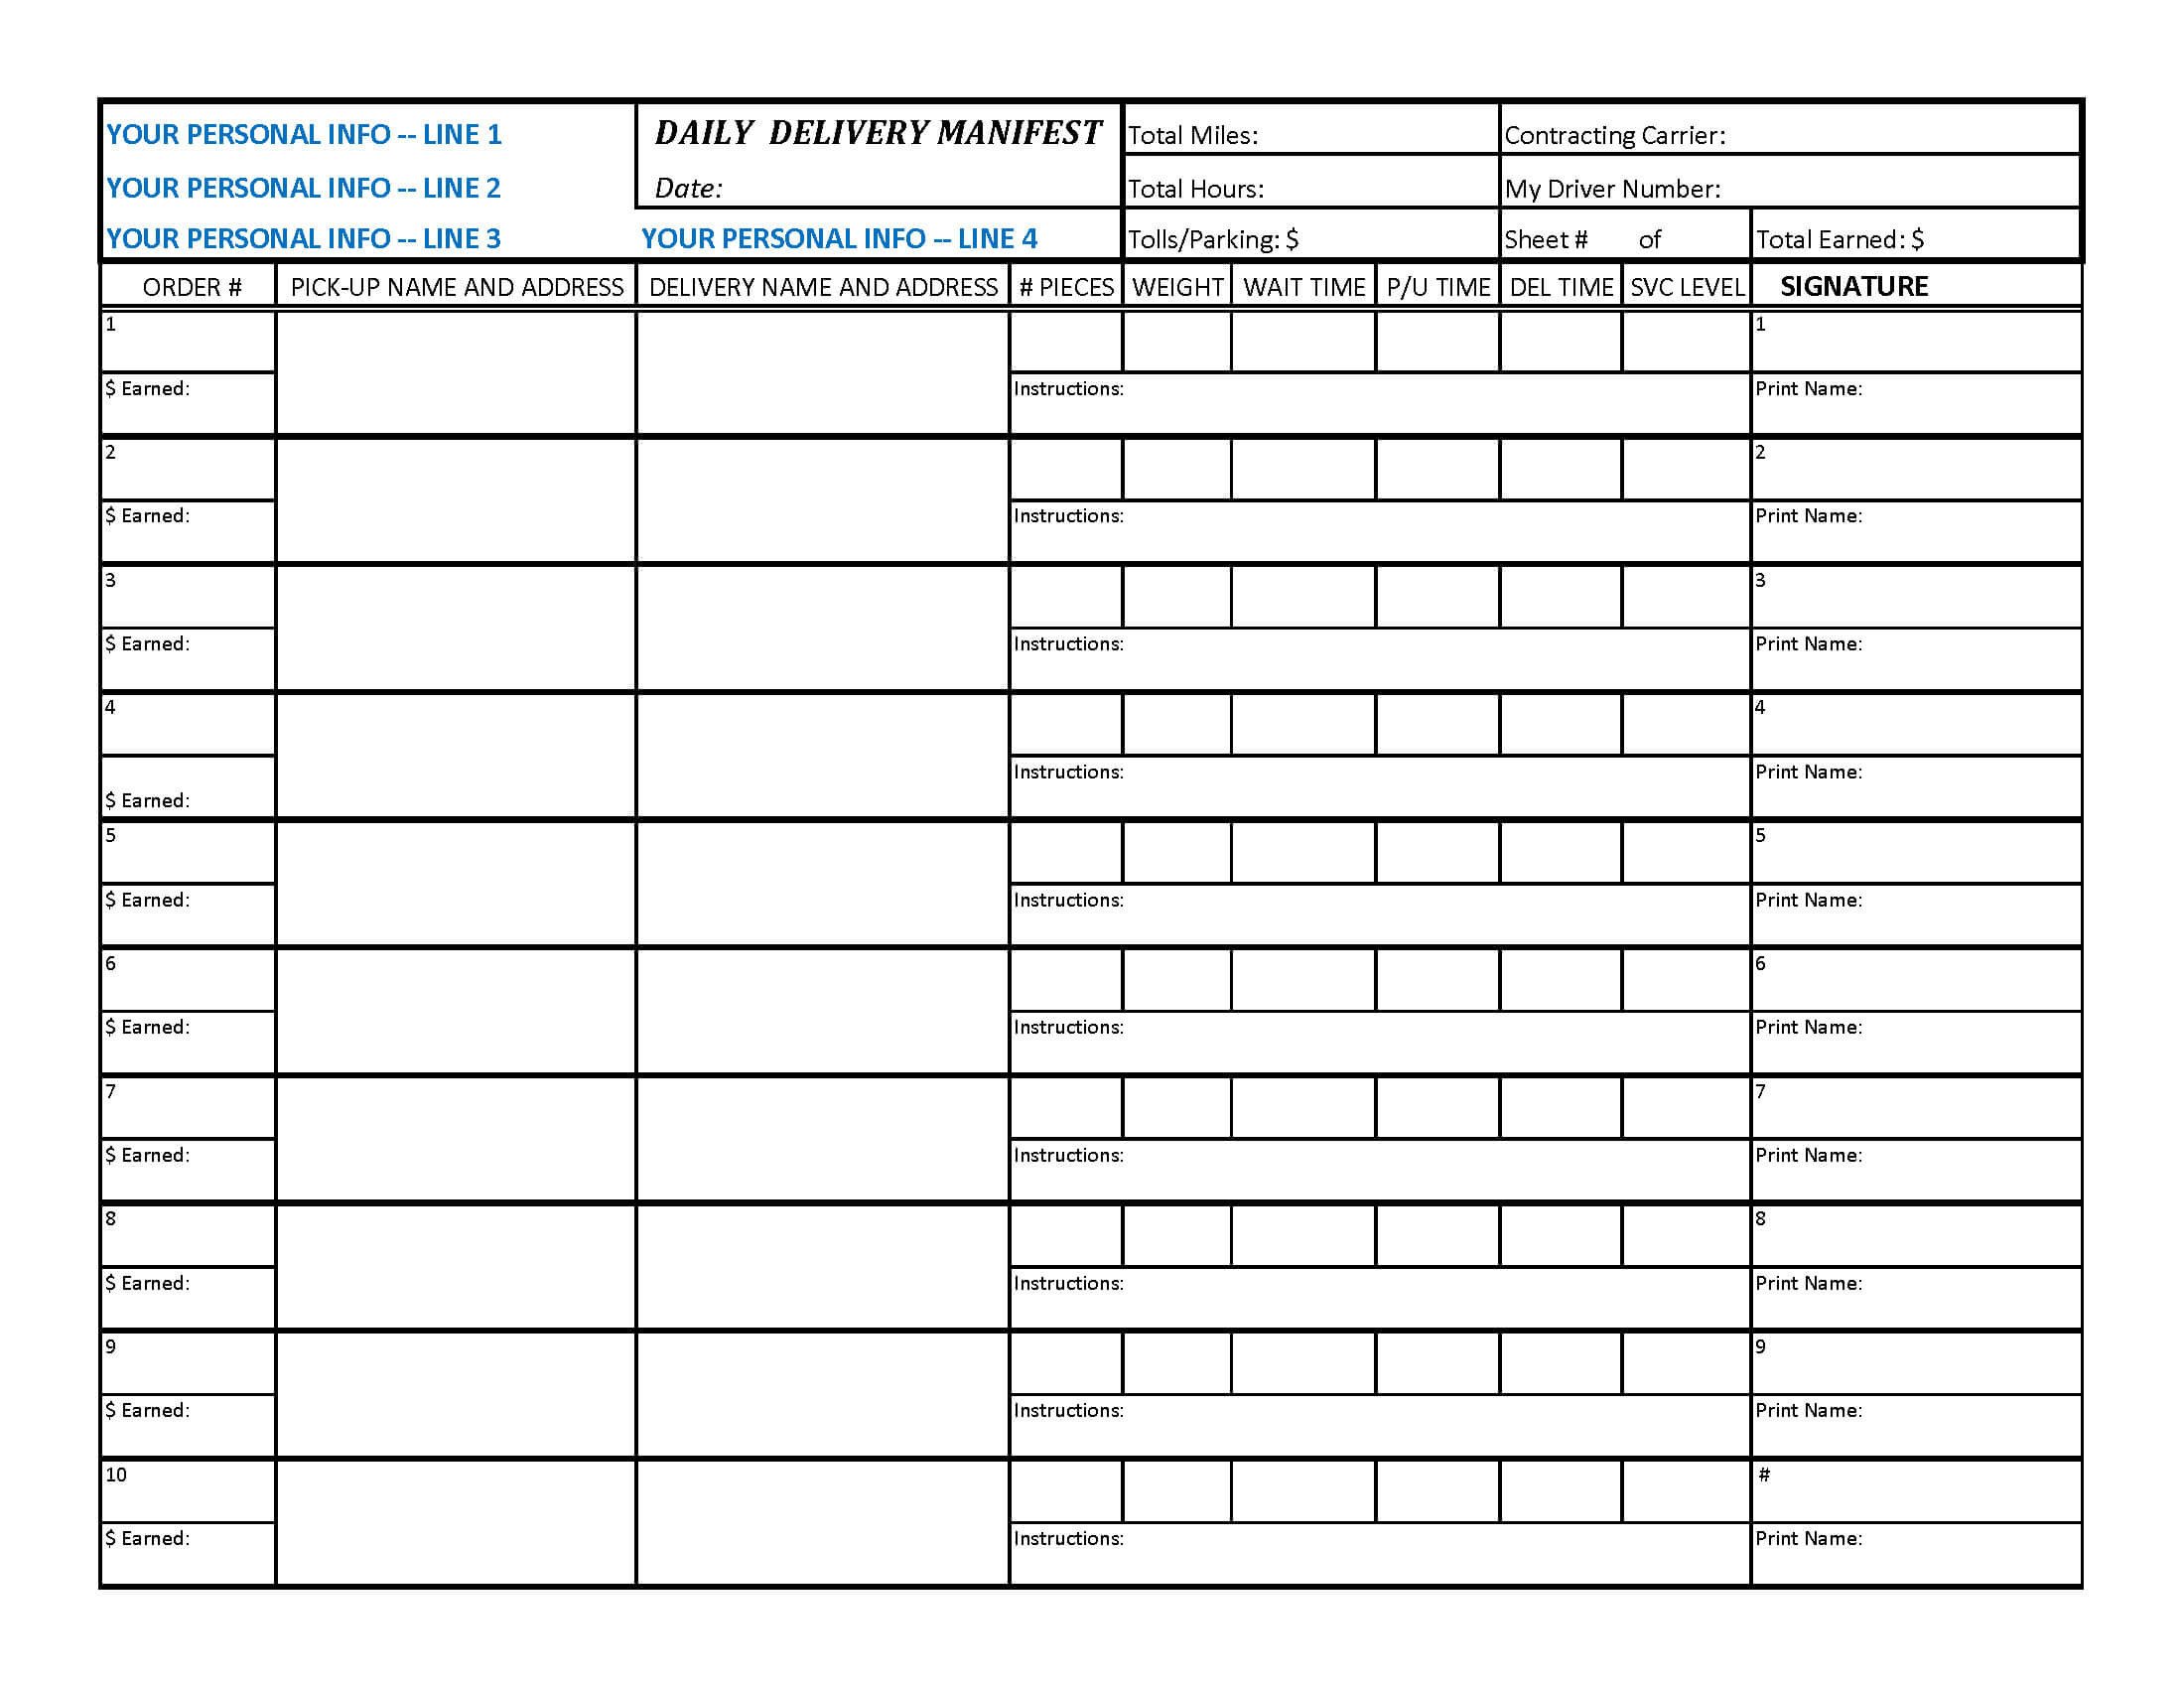 Driver Manifest Template Get A Personalized Delivery Manifest form